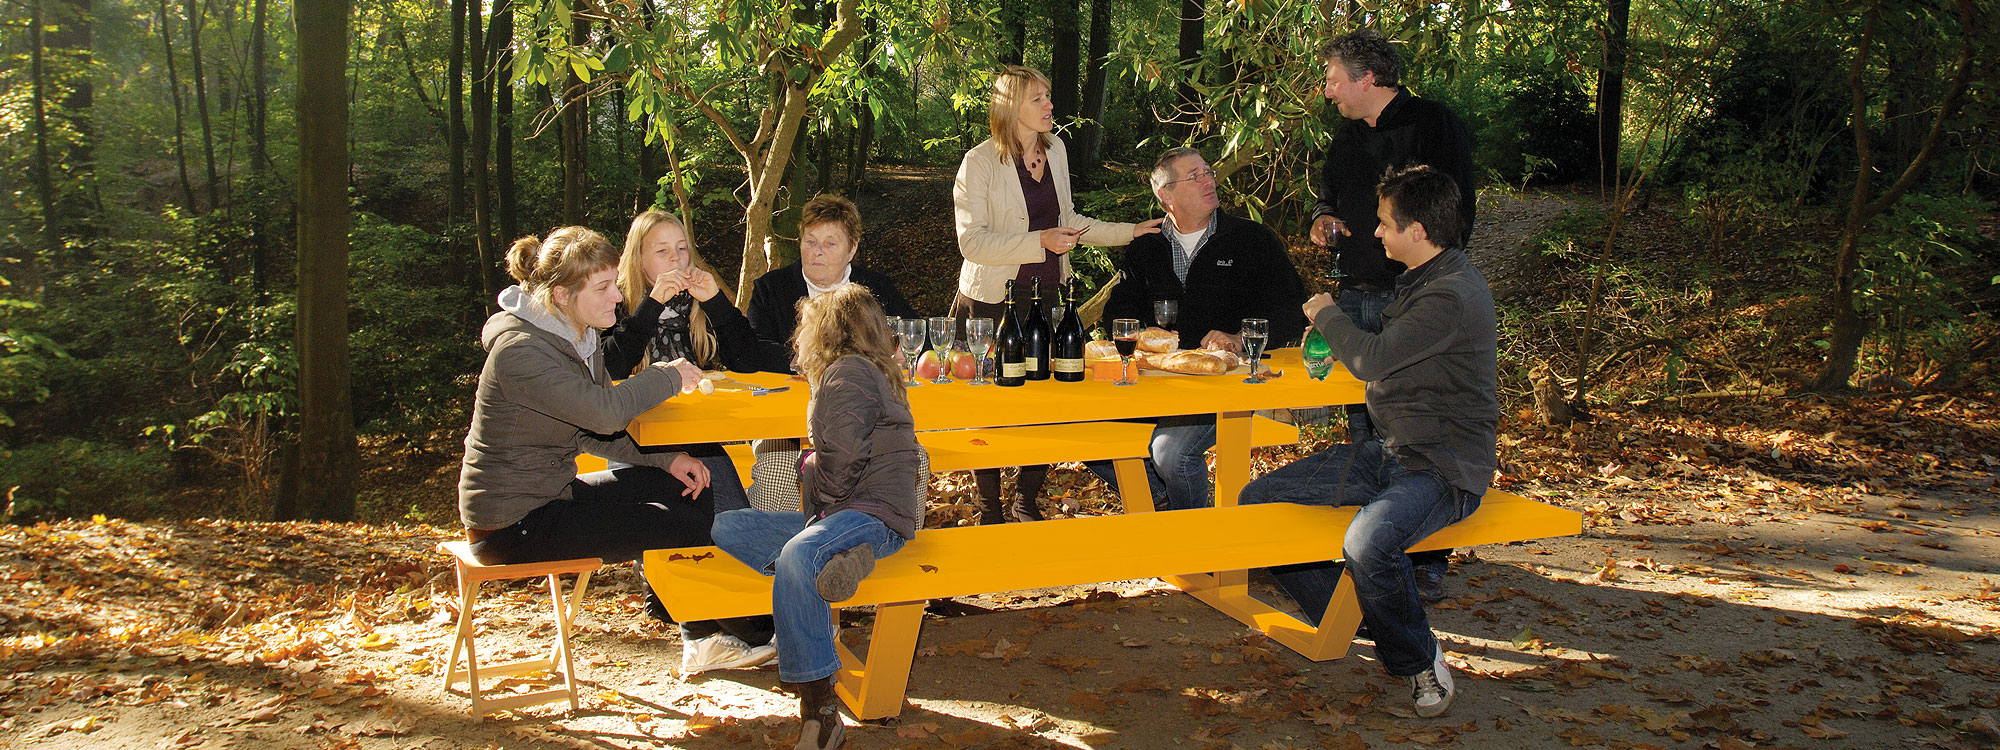 Famly Sat At Yellow Cassecroute MODERN Picnic Table & LUXURY PICNIC FURNITURE. SHORT Or LONG Picnic Table Sizes Up To 14m Made In High QUALITY Picnic Furniture Materials. Cassecroute DESIGNER Picnic FURNITURE Designed By Ronald Mattelé. CASSECROUTE Modern PICNIC Tables. DESGNER Picnic Table, LARGE Rectangular Picnic Tables, CIRCULAR Steel Picnic Tables In HIGH QUALITY Picnic FURNITURE Materials.